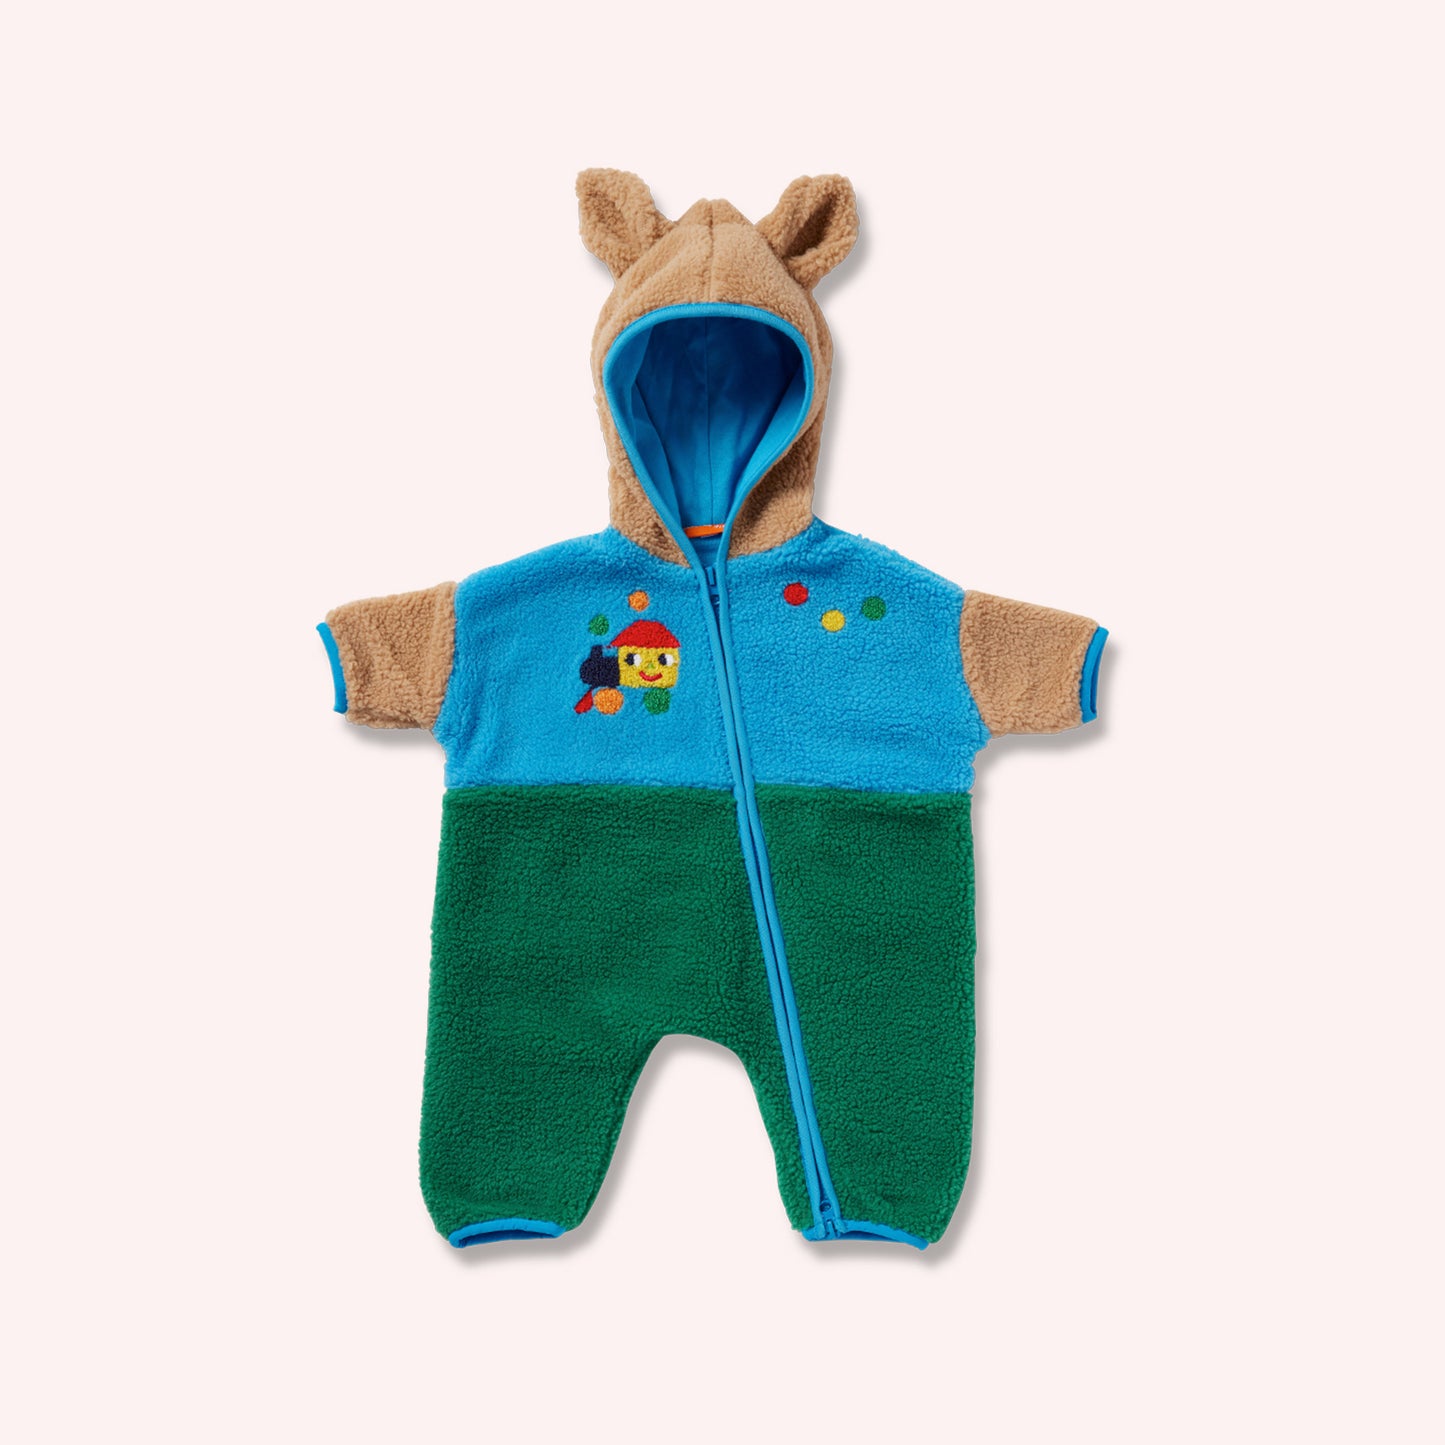 Sherpa Roosuit  - Rainbow Express